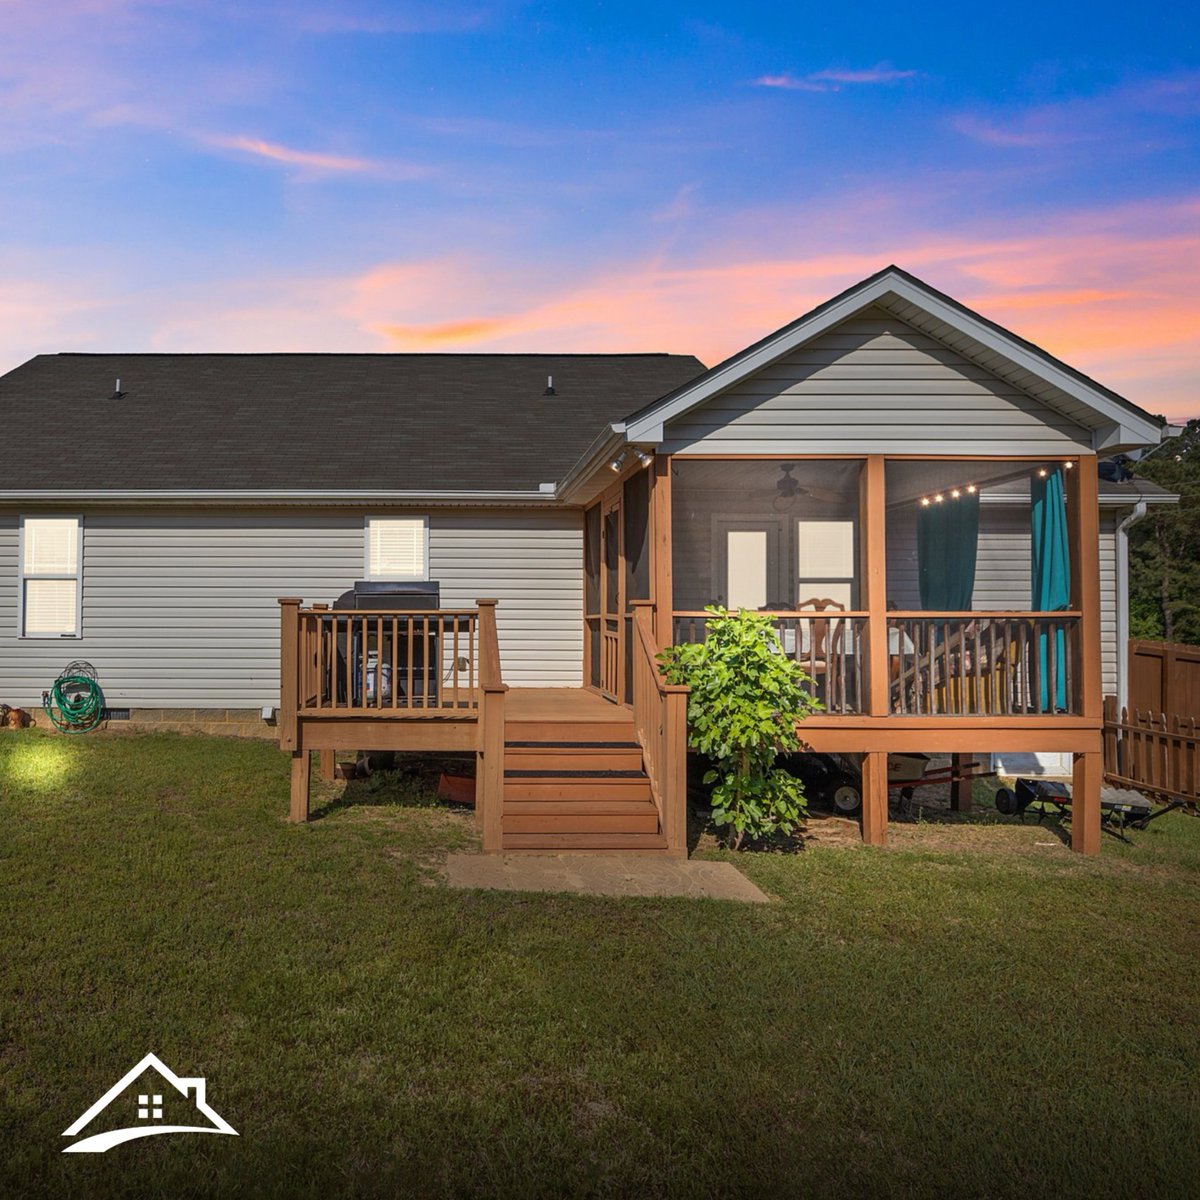 Charming ranch home with screened-in porch, grilling deck & fenced back yard! 🏡 
📌 24 High Standard Lane, Angier NC 27501
🎯 $350,000
3 bed | 2 bath | 1,346 sq.ft. | 0.49 acres

☎️ (919) 845-9909
🌐 bit.ly/3WiwVDP
#ncrealestate #newlisting #property #angier #ranch